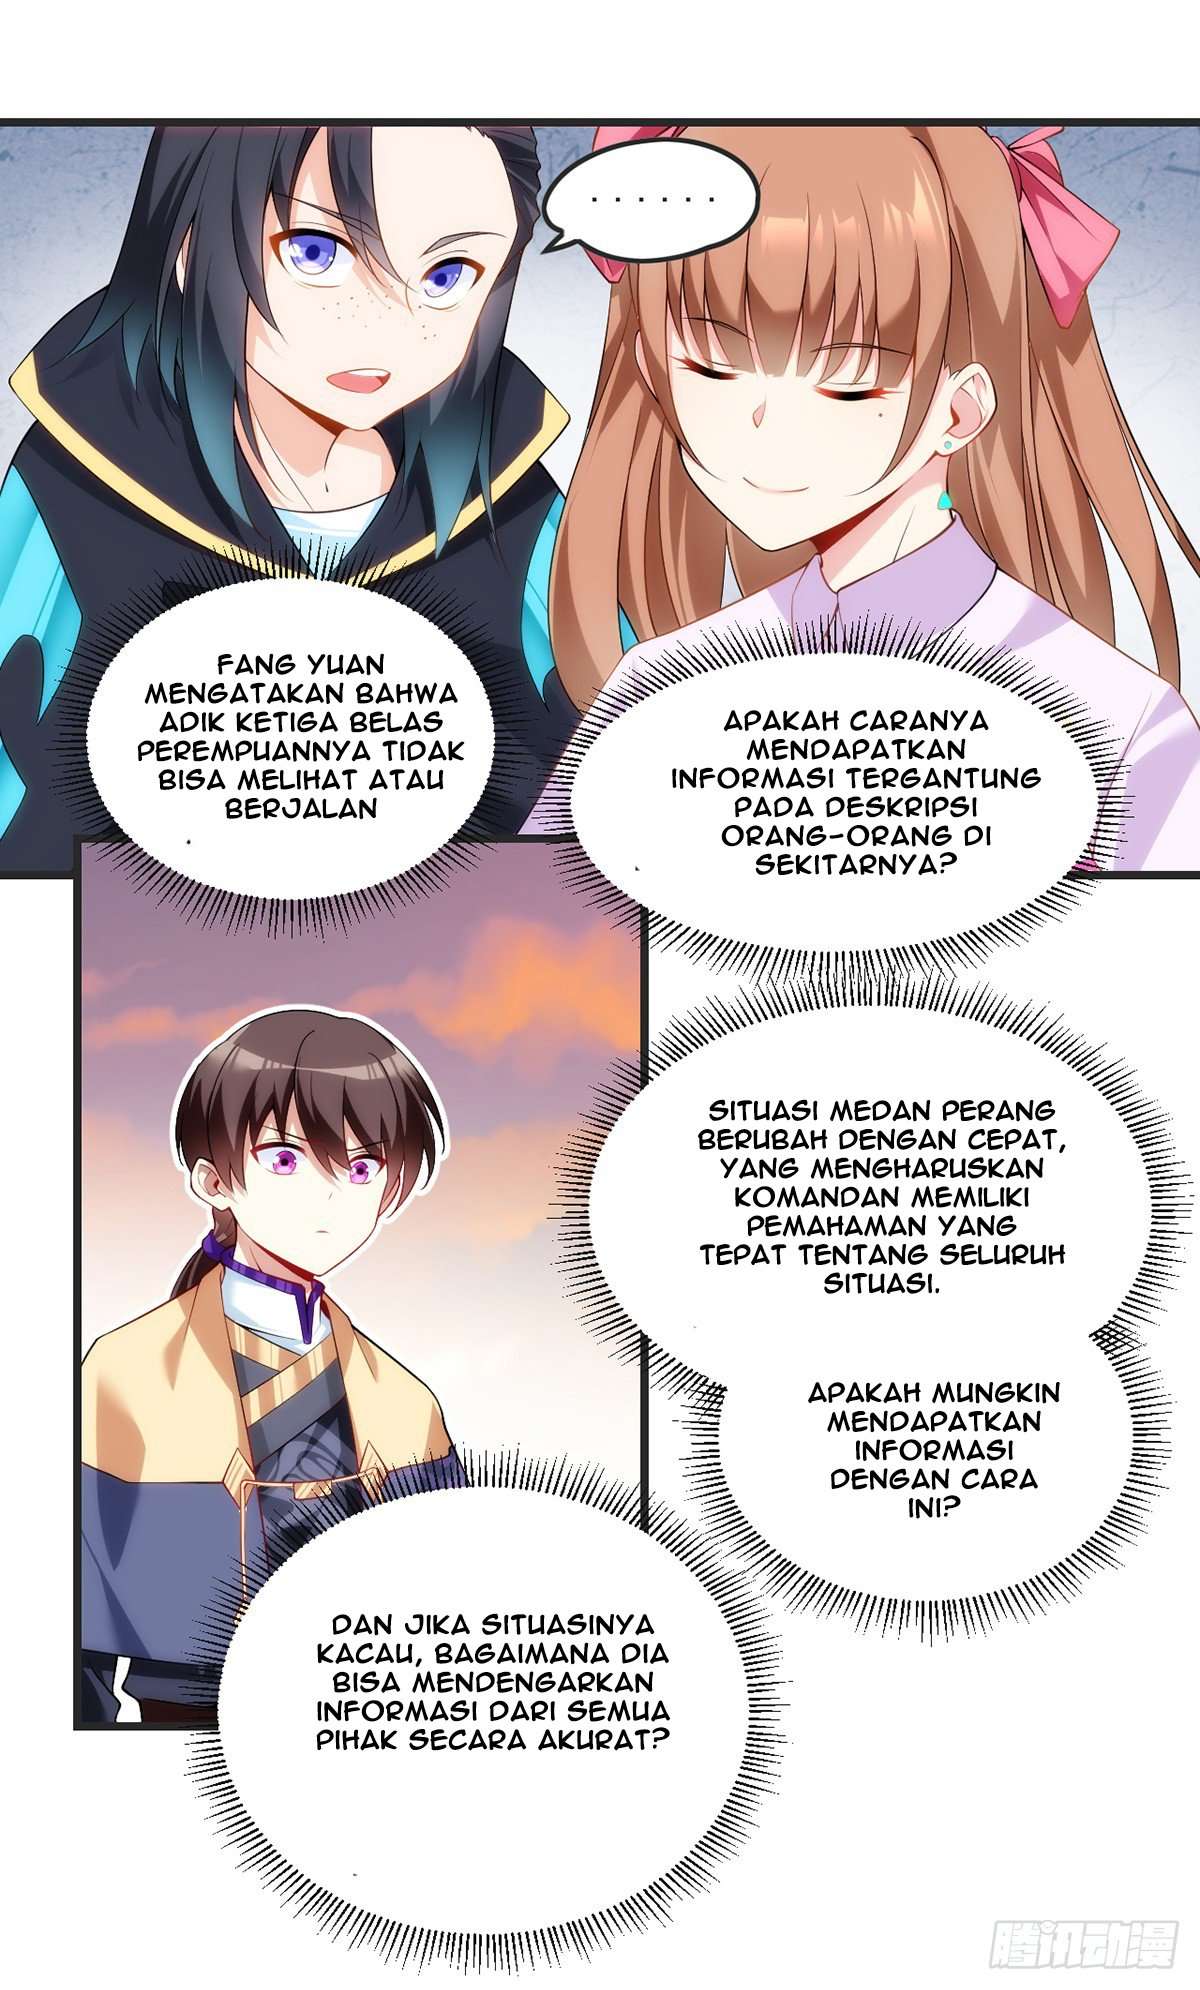 Useless Young Master Chapter 17 Bahasa Indonesia